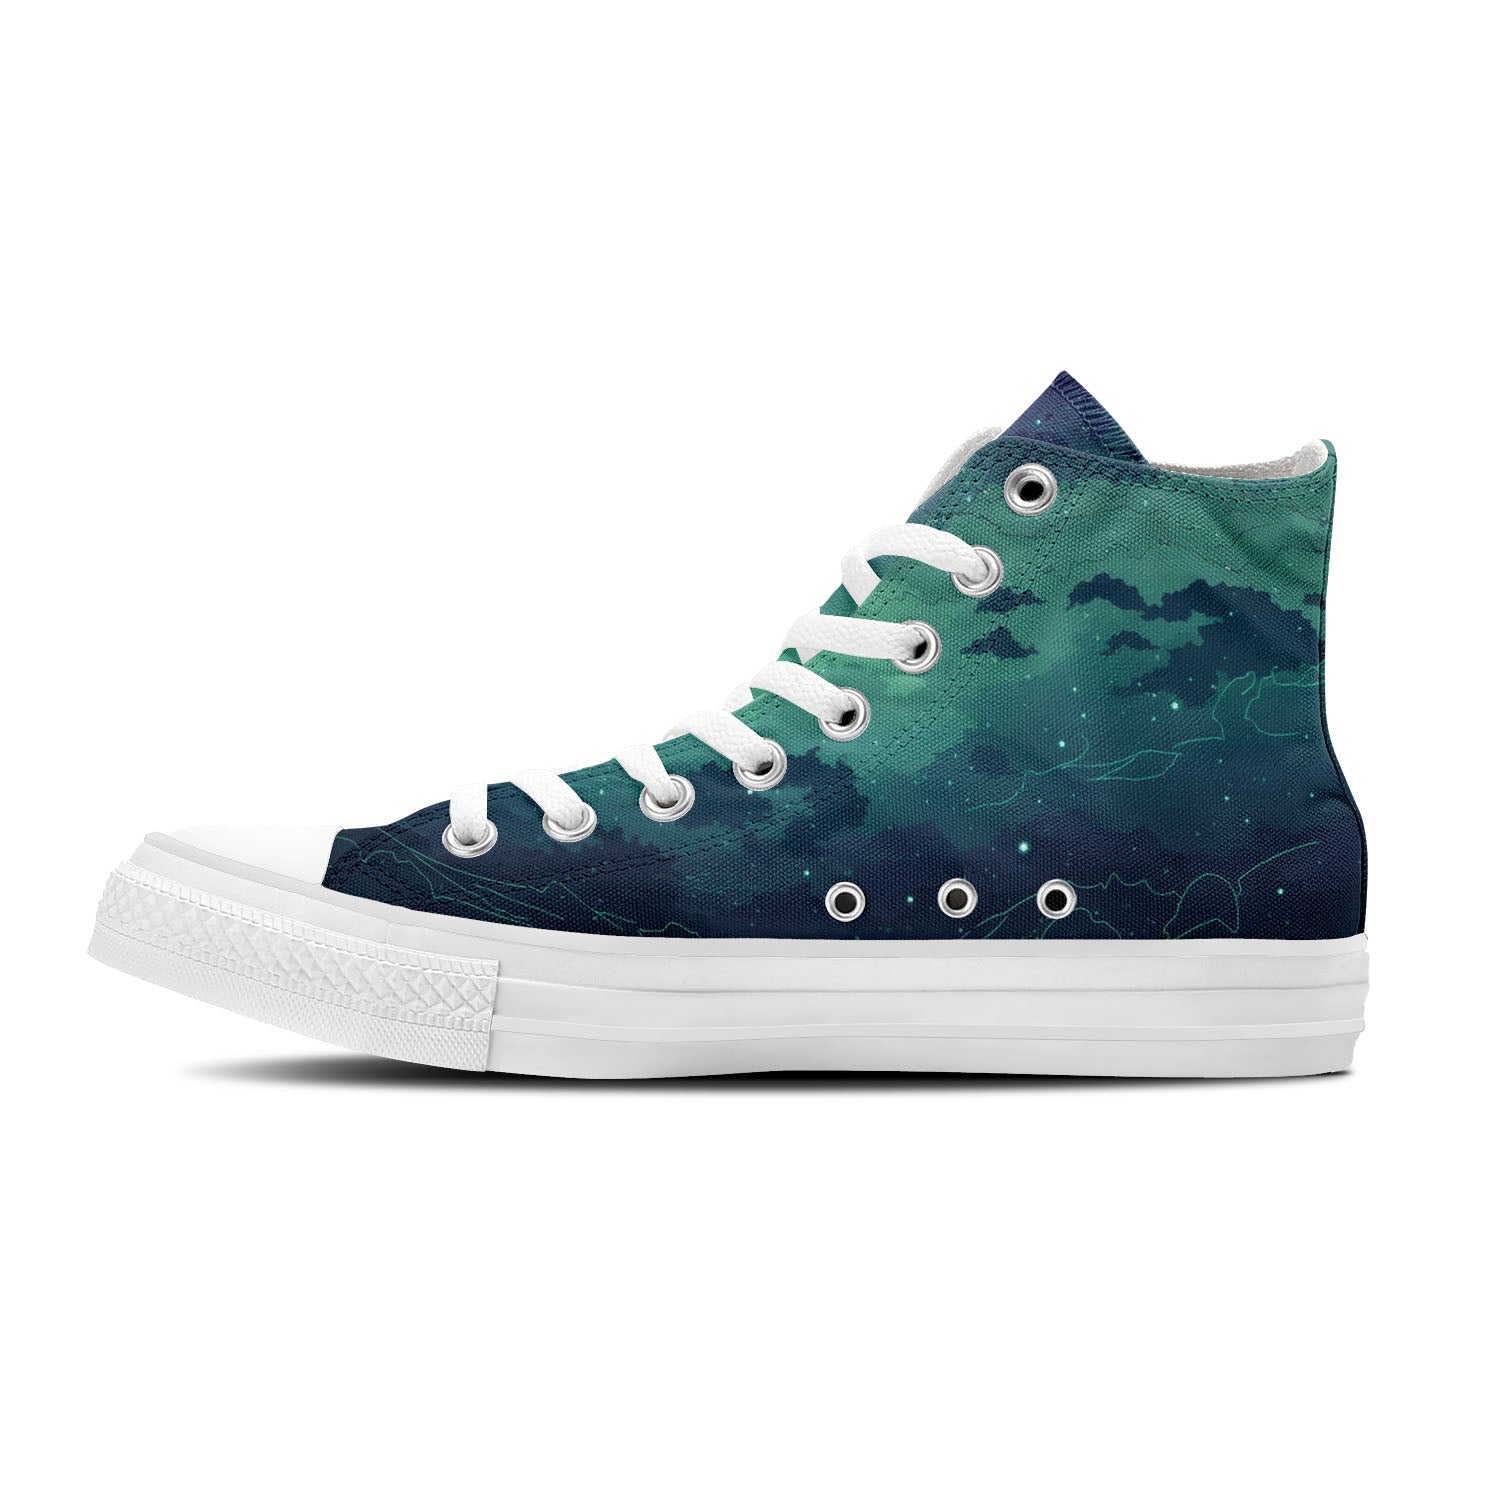 Nocturnal Chic: Central-High Canvas Shoes featuring Starlit Sky – A Stylish Choice for Both Genders